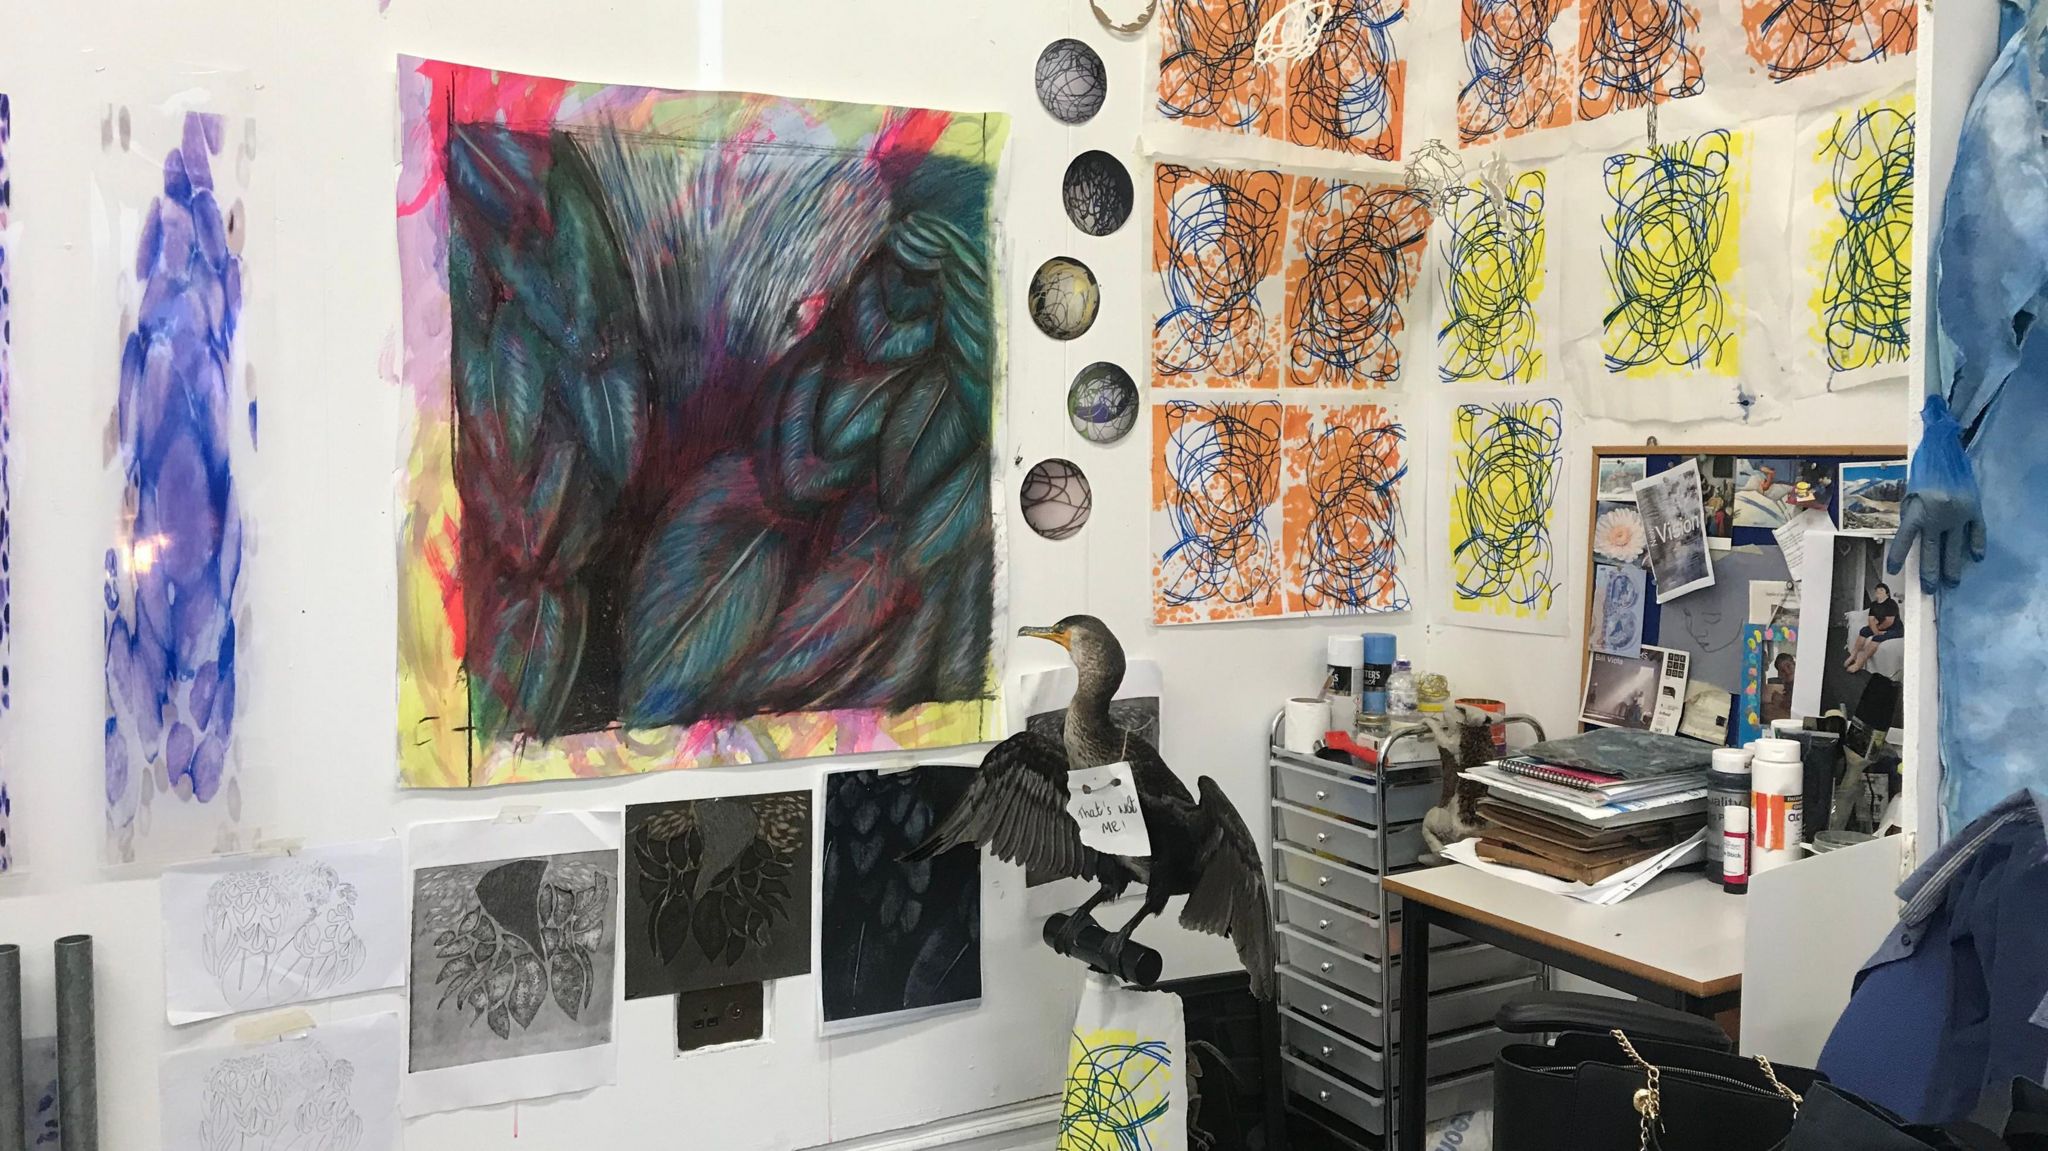 A picture of the inside of Joanne's studio. The room contains a small desk and a set of drawers, but the walls are covered in abstract, brightly coloured pictures and there is what appears to be a large taxidermy bird in the centre on a stand.  